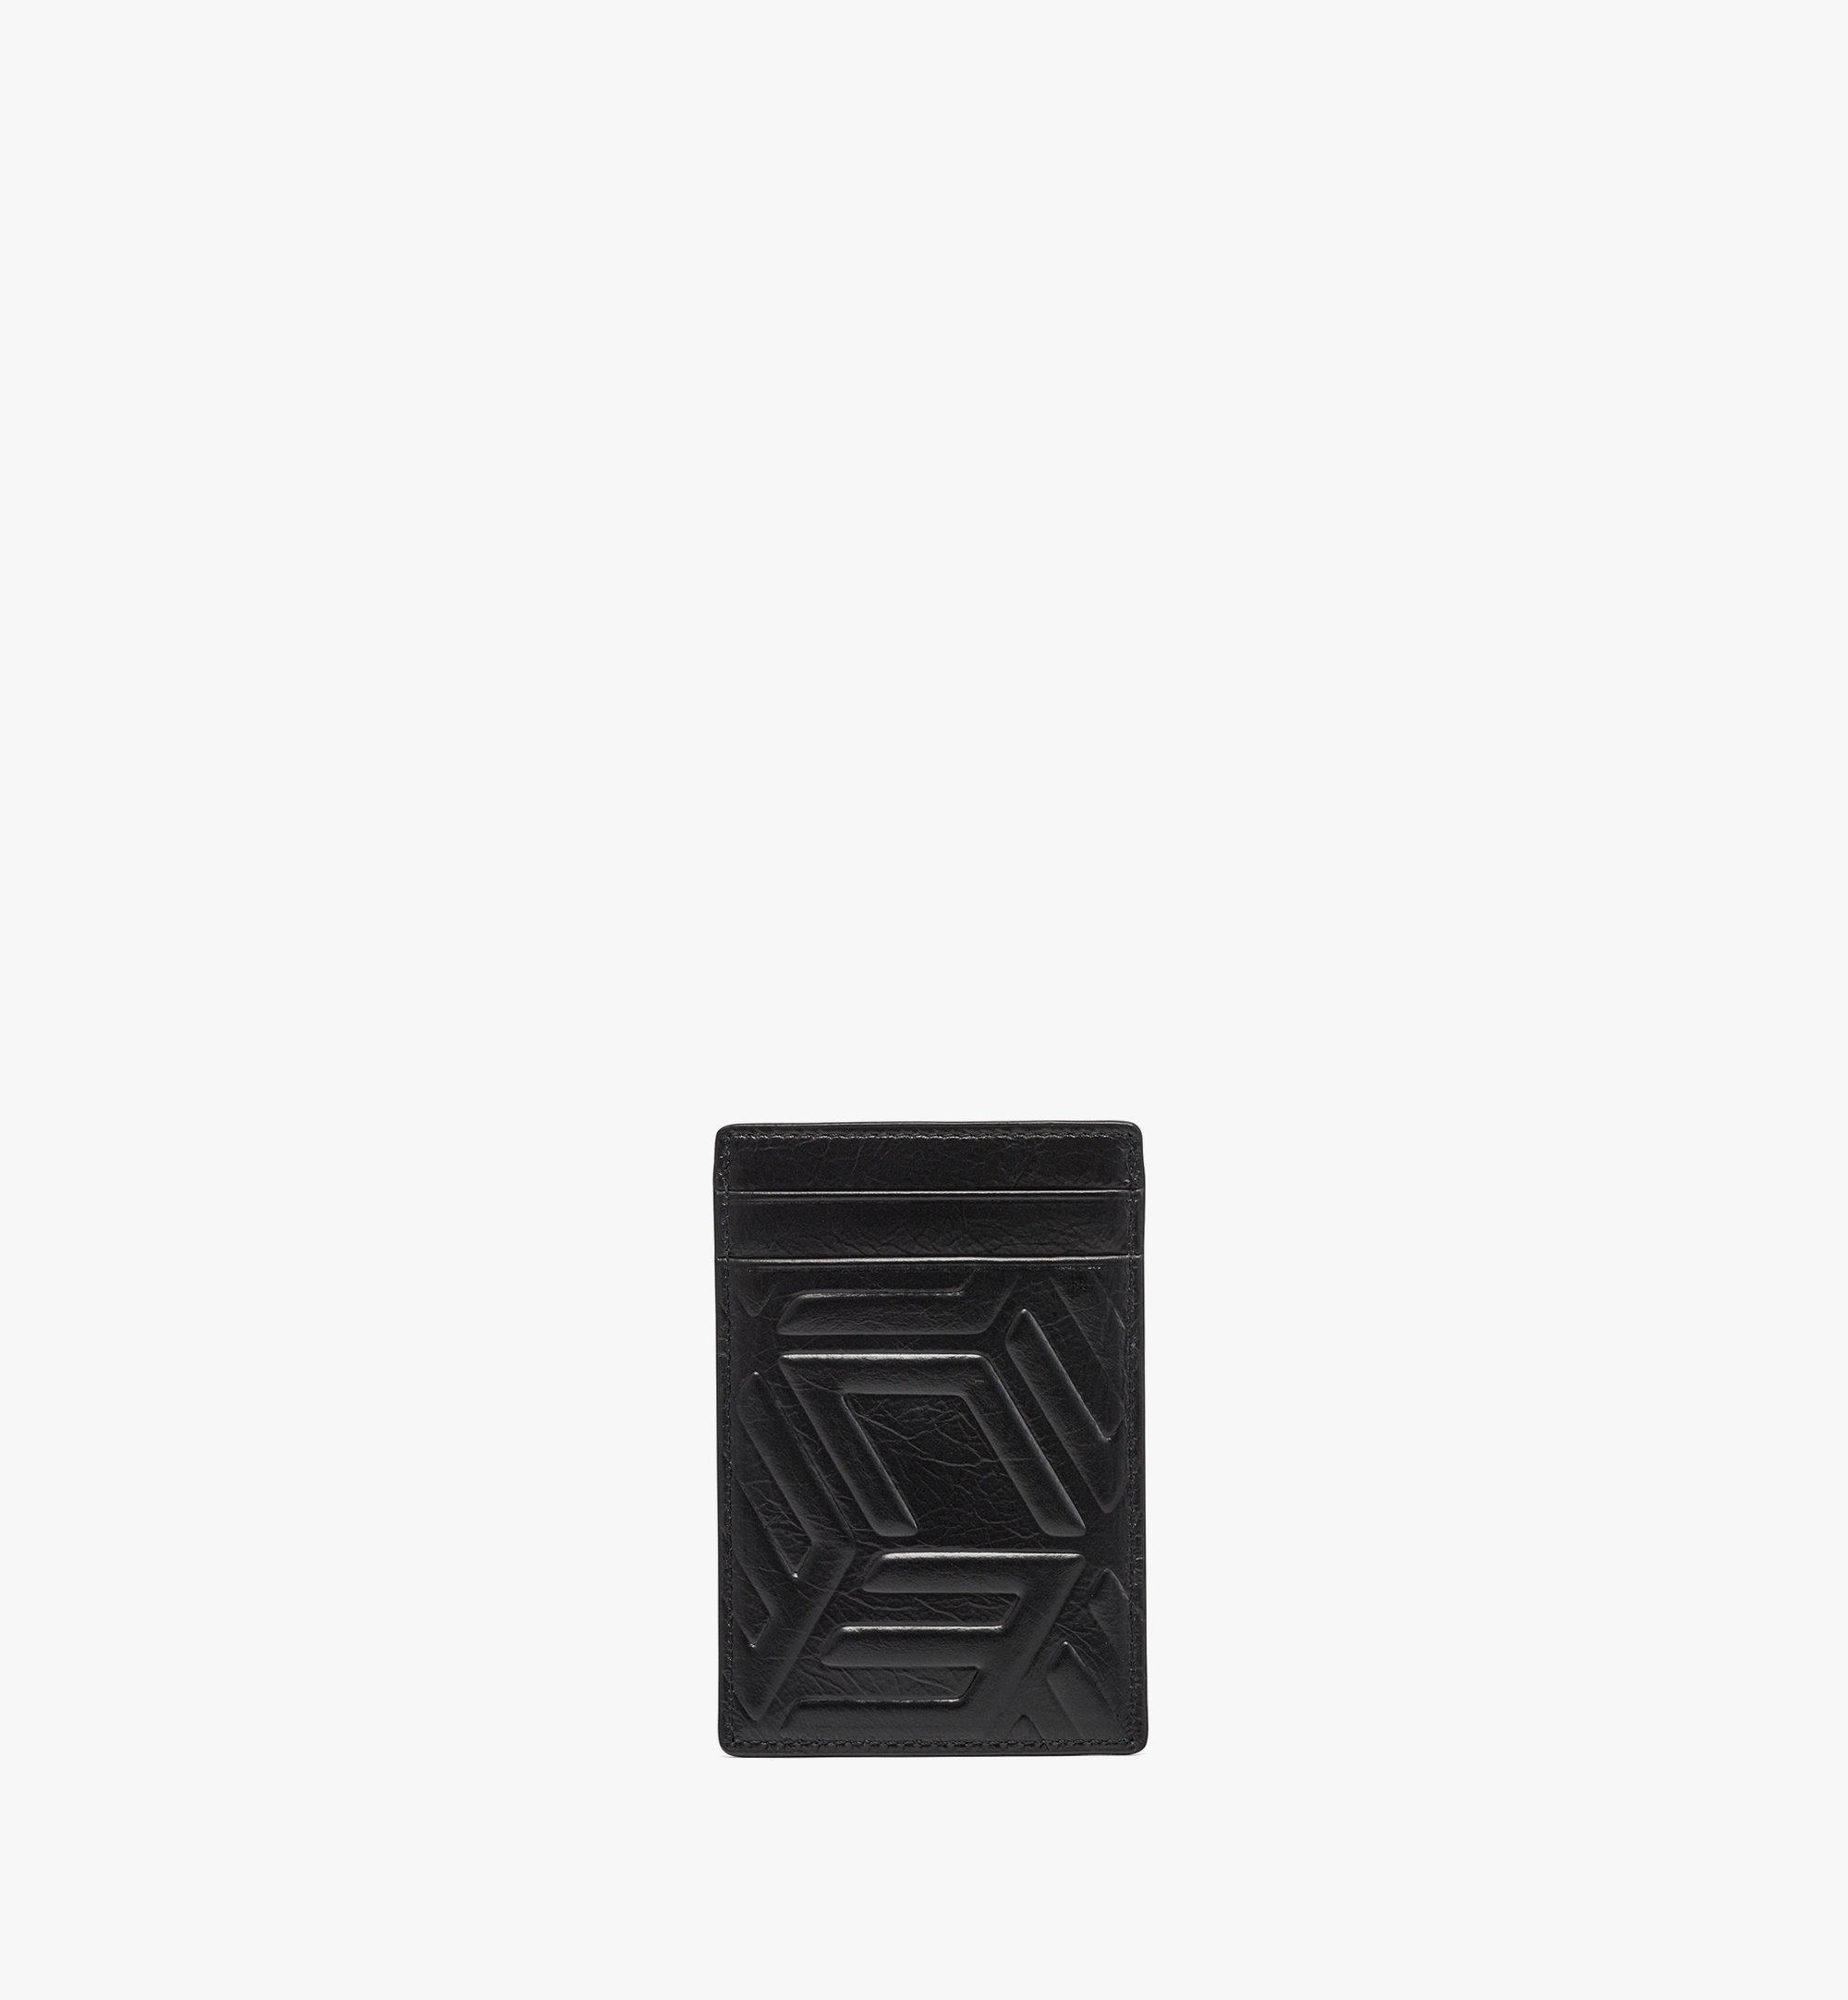 MCM Aren Money Clip Card Case in Crushed Cubic Leather Black MXCDATA03BK001 Alternate View 2